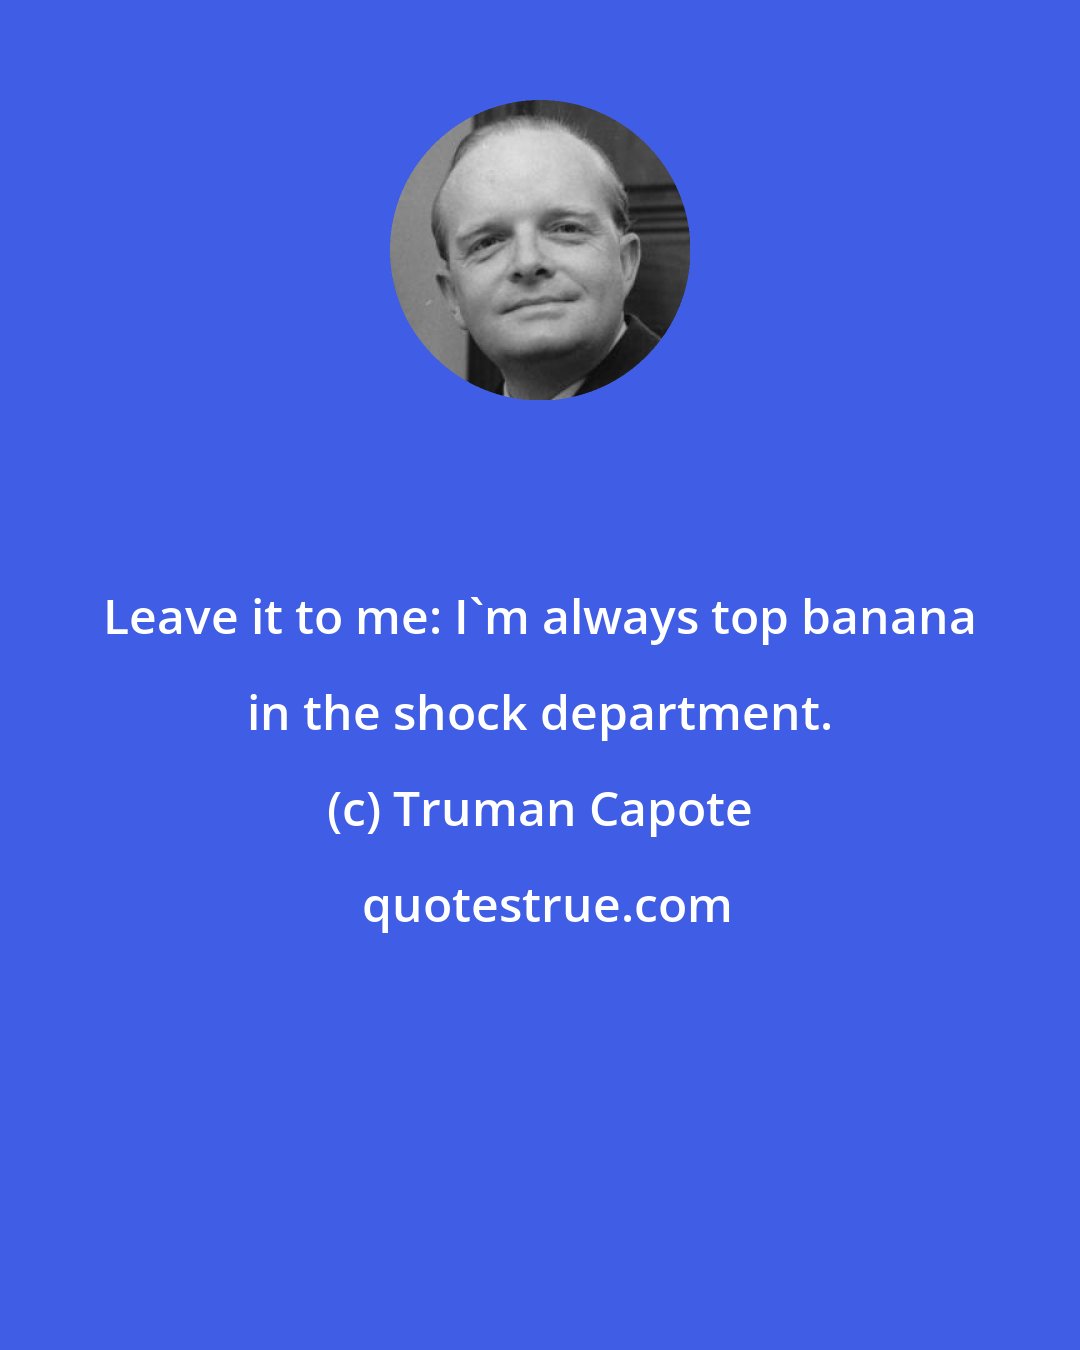 Truman Capote: Leave it to me: I'm always top banana in the shock department.